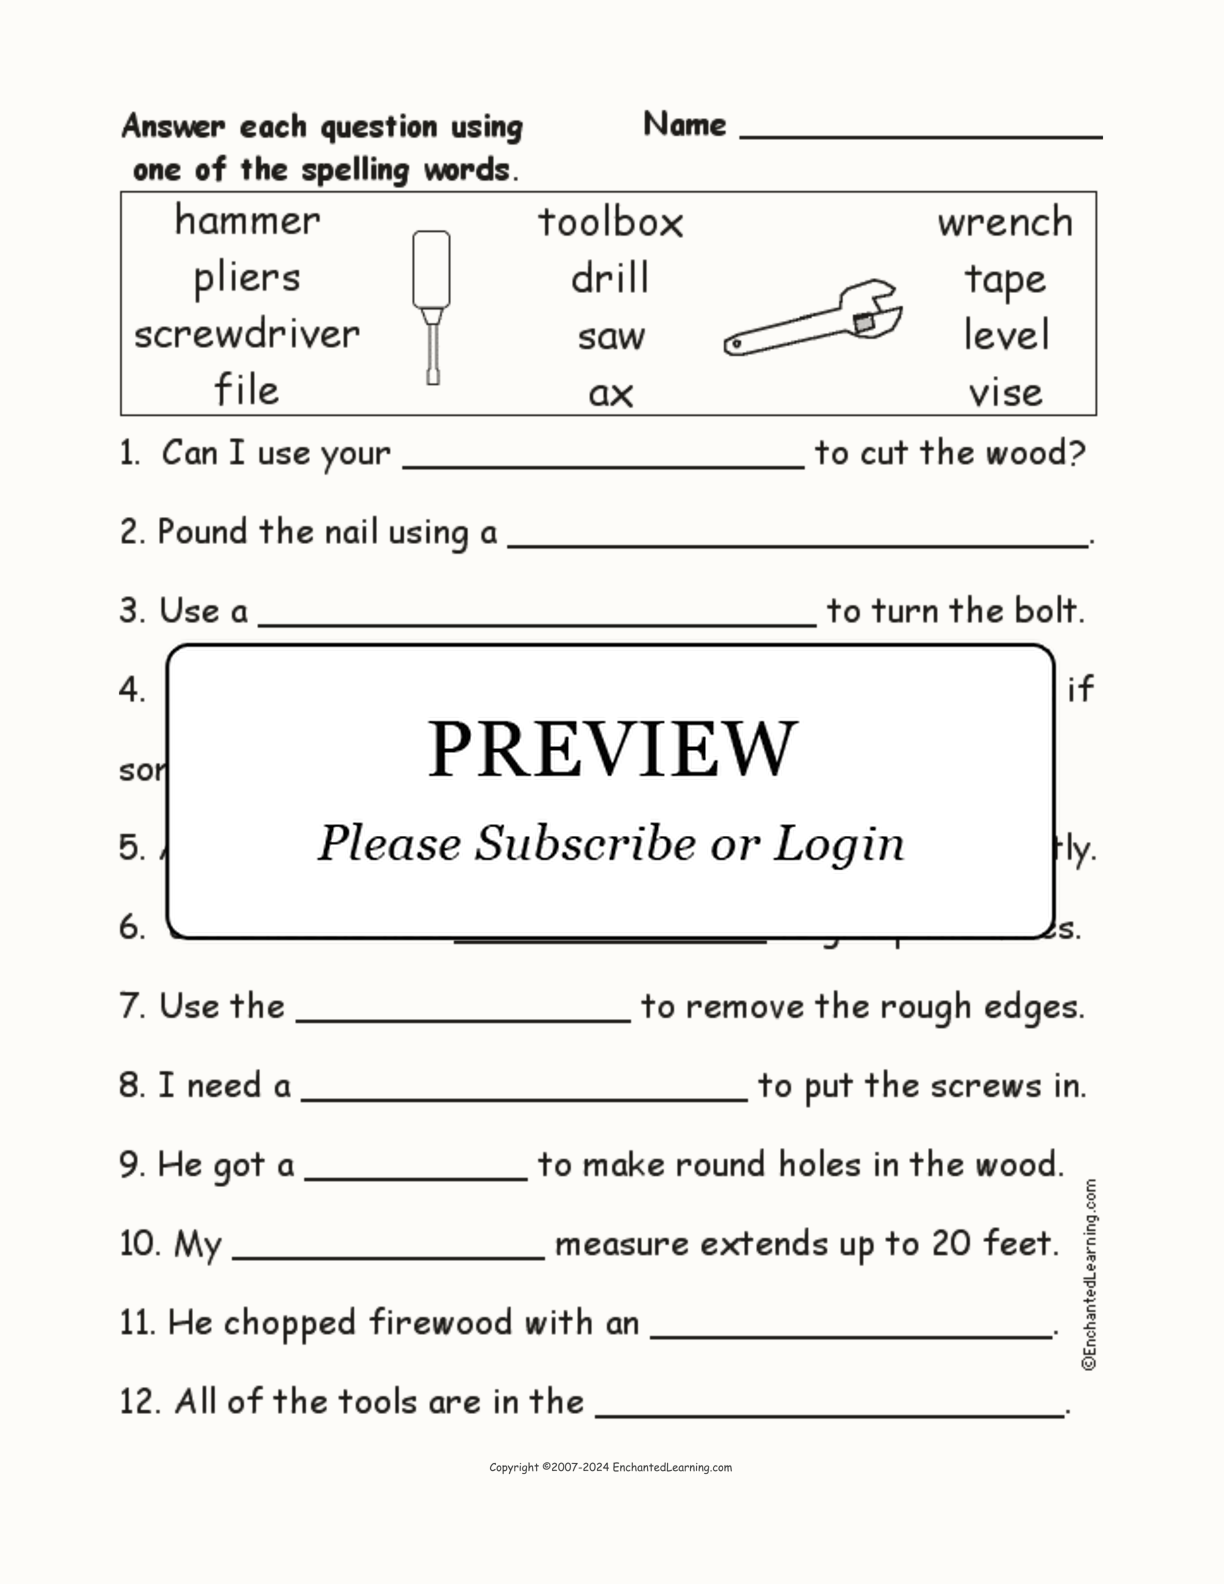 Tools: Spelling Word Questions interactive worksheet page 1